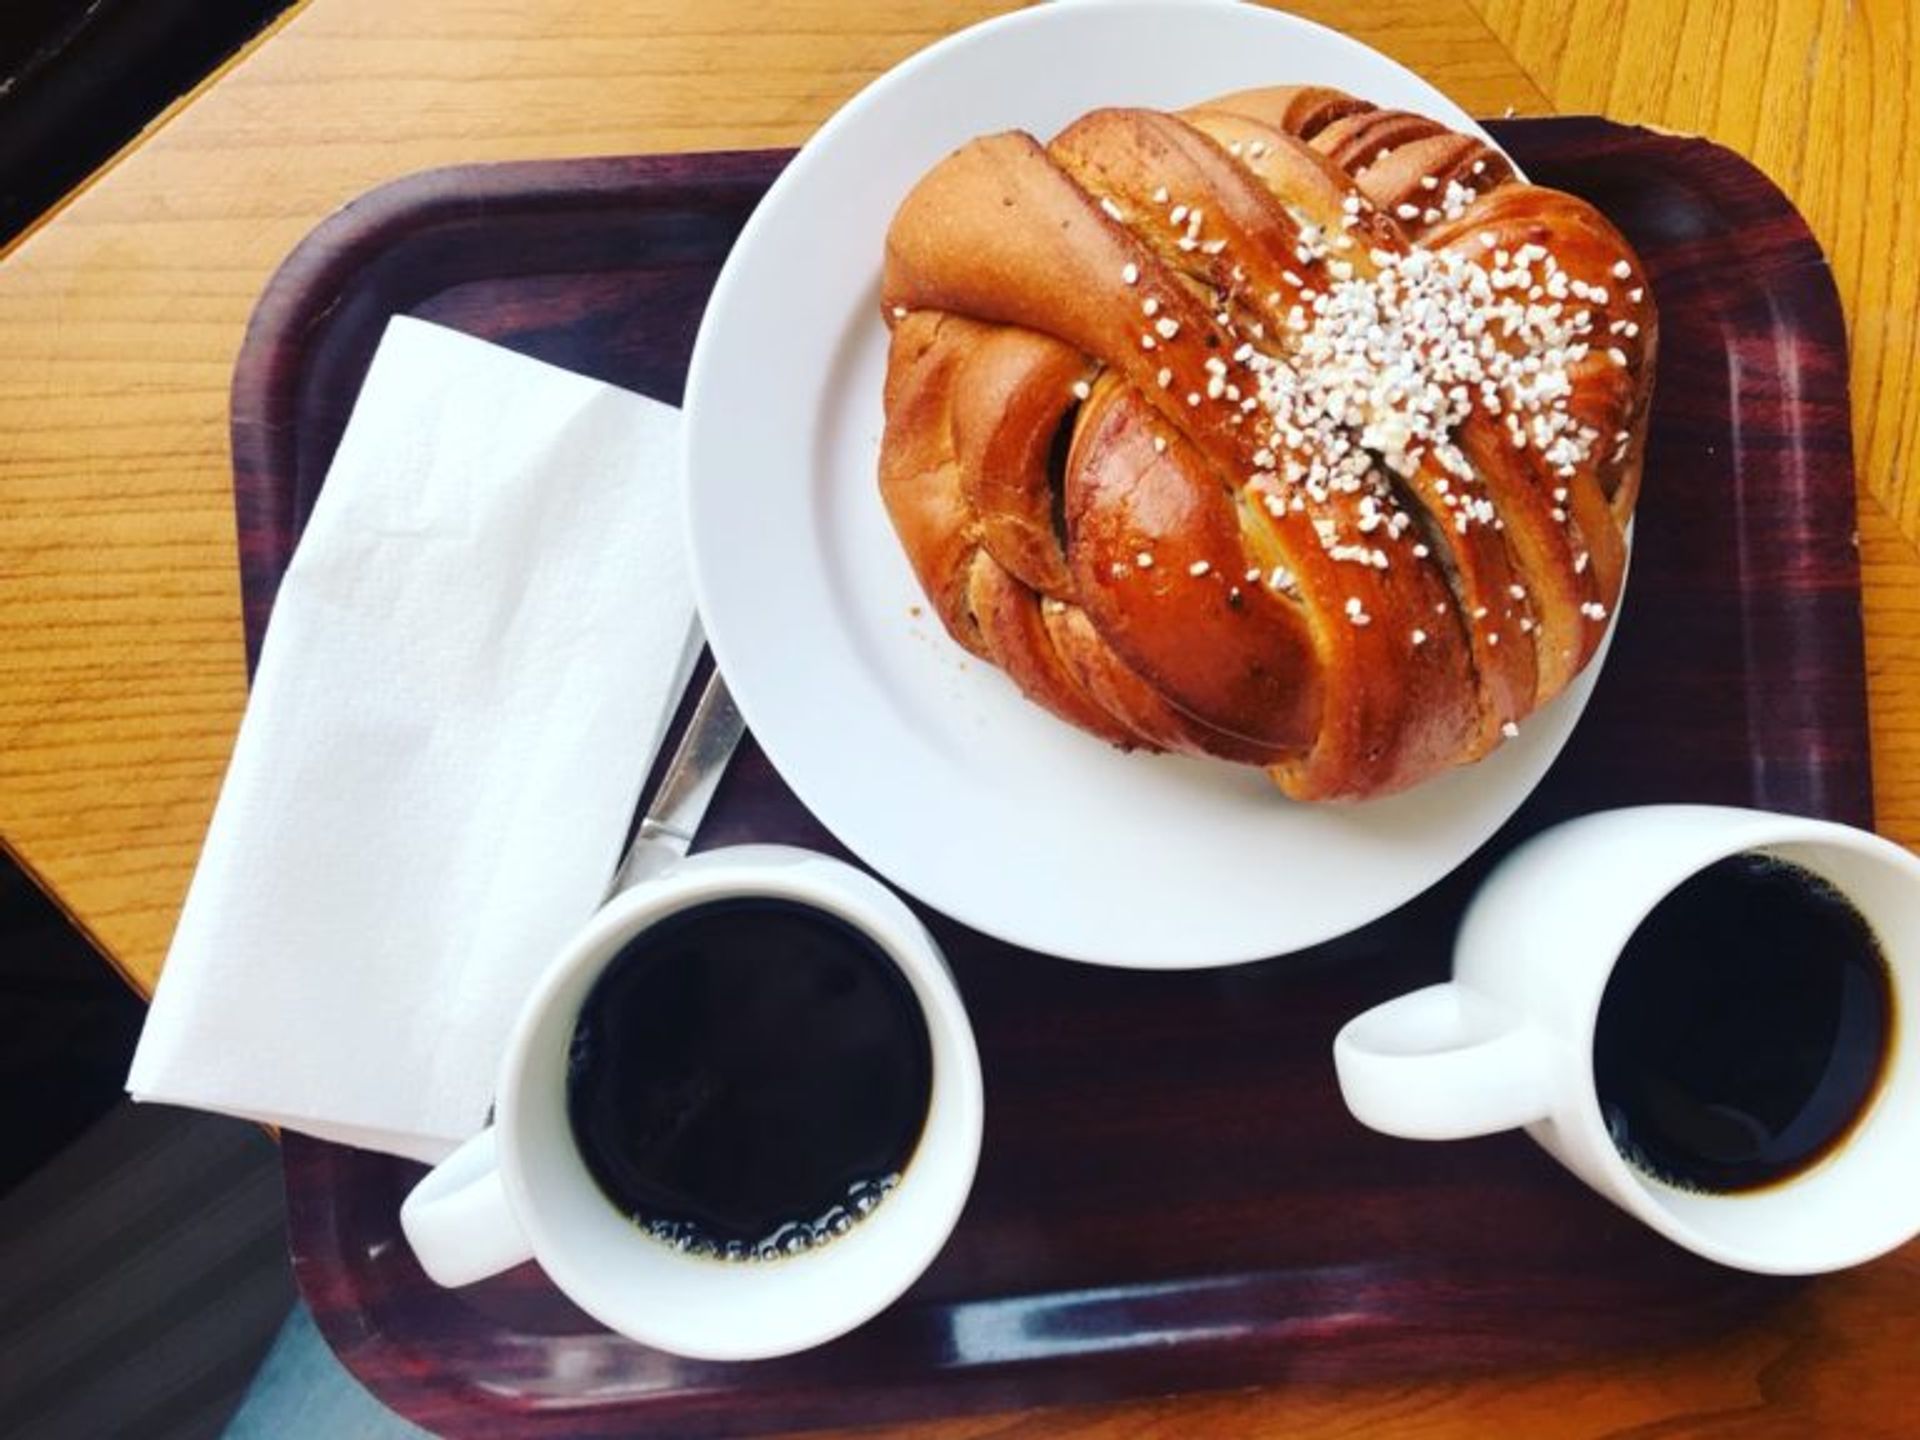 Two cups of black coffee and a cinnamon bun on a tray.